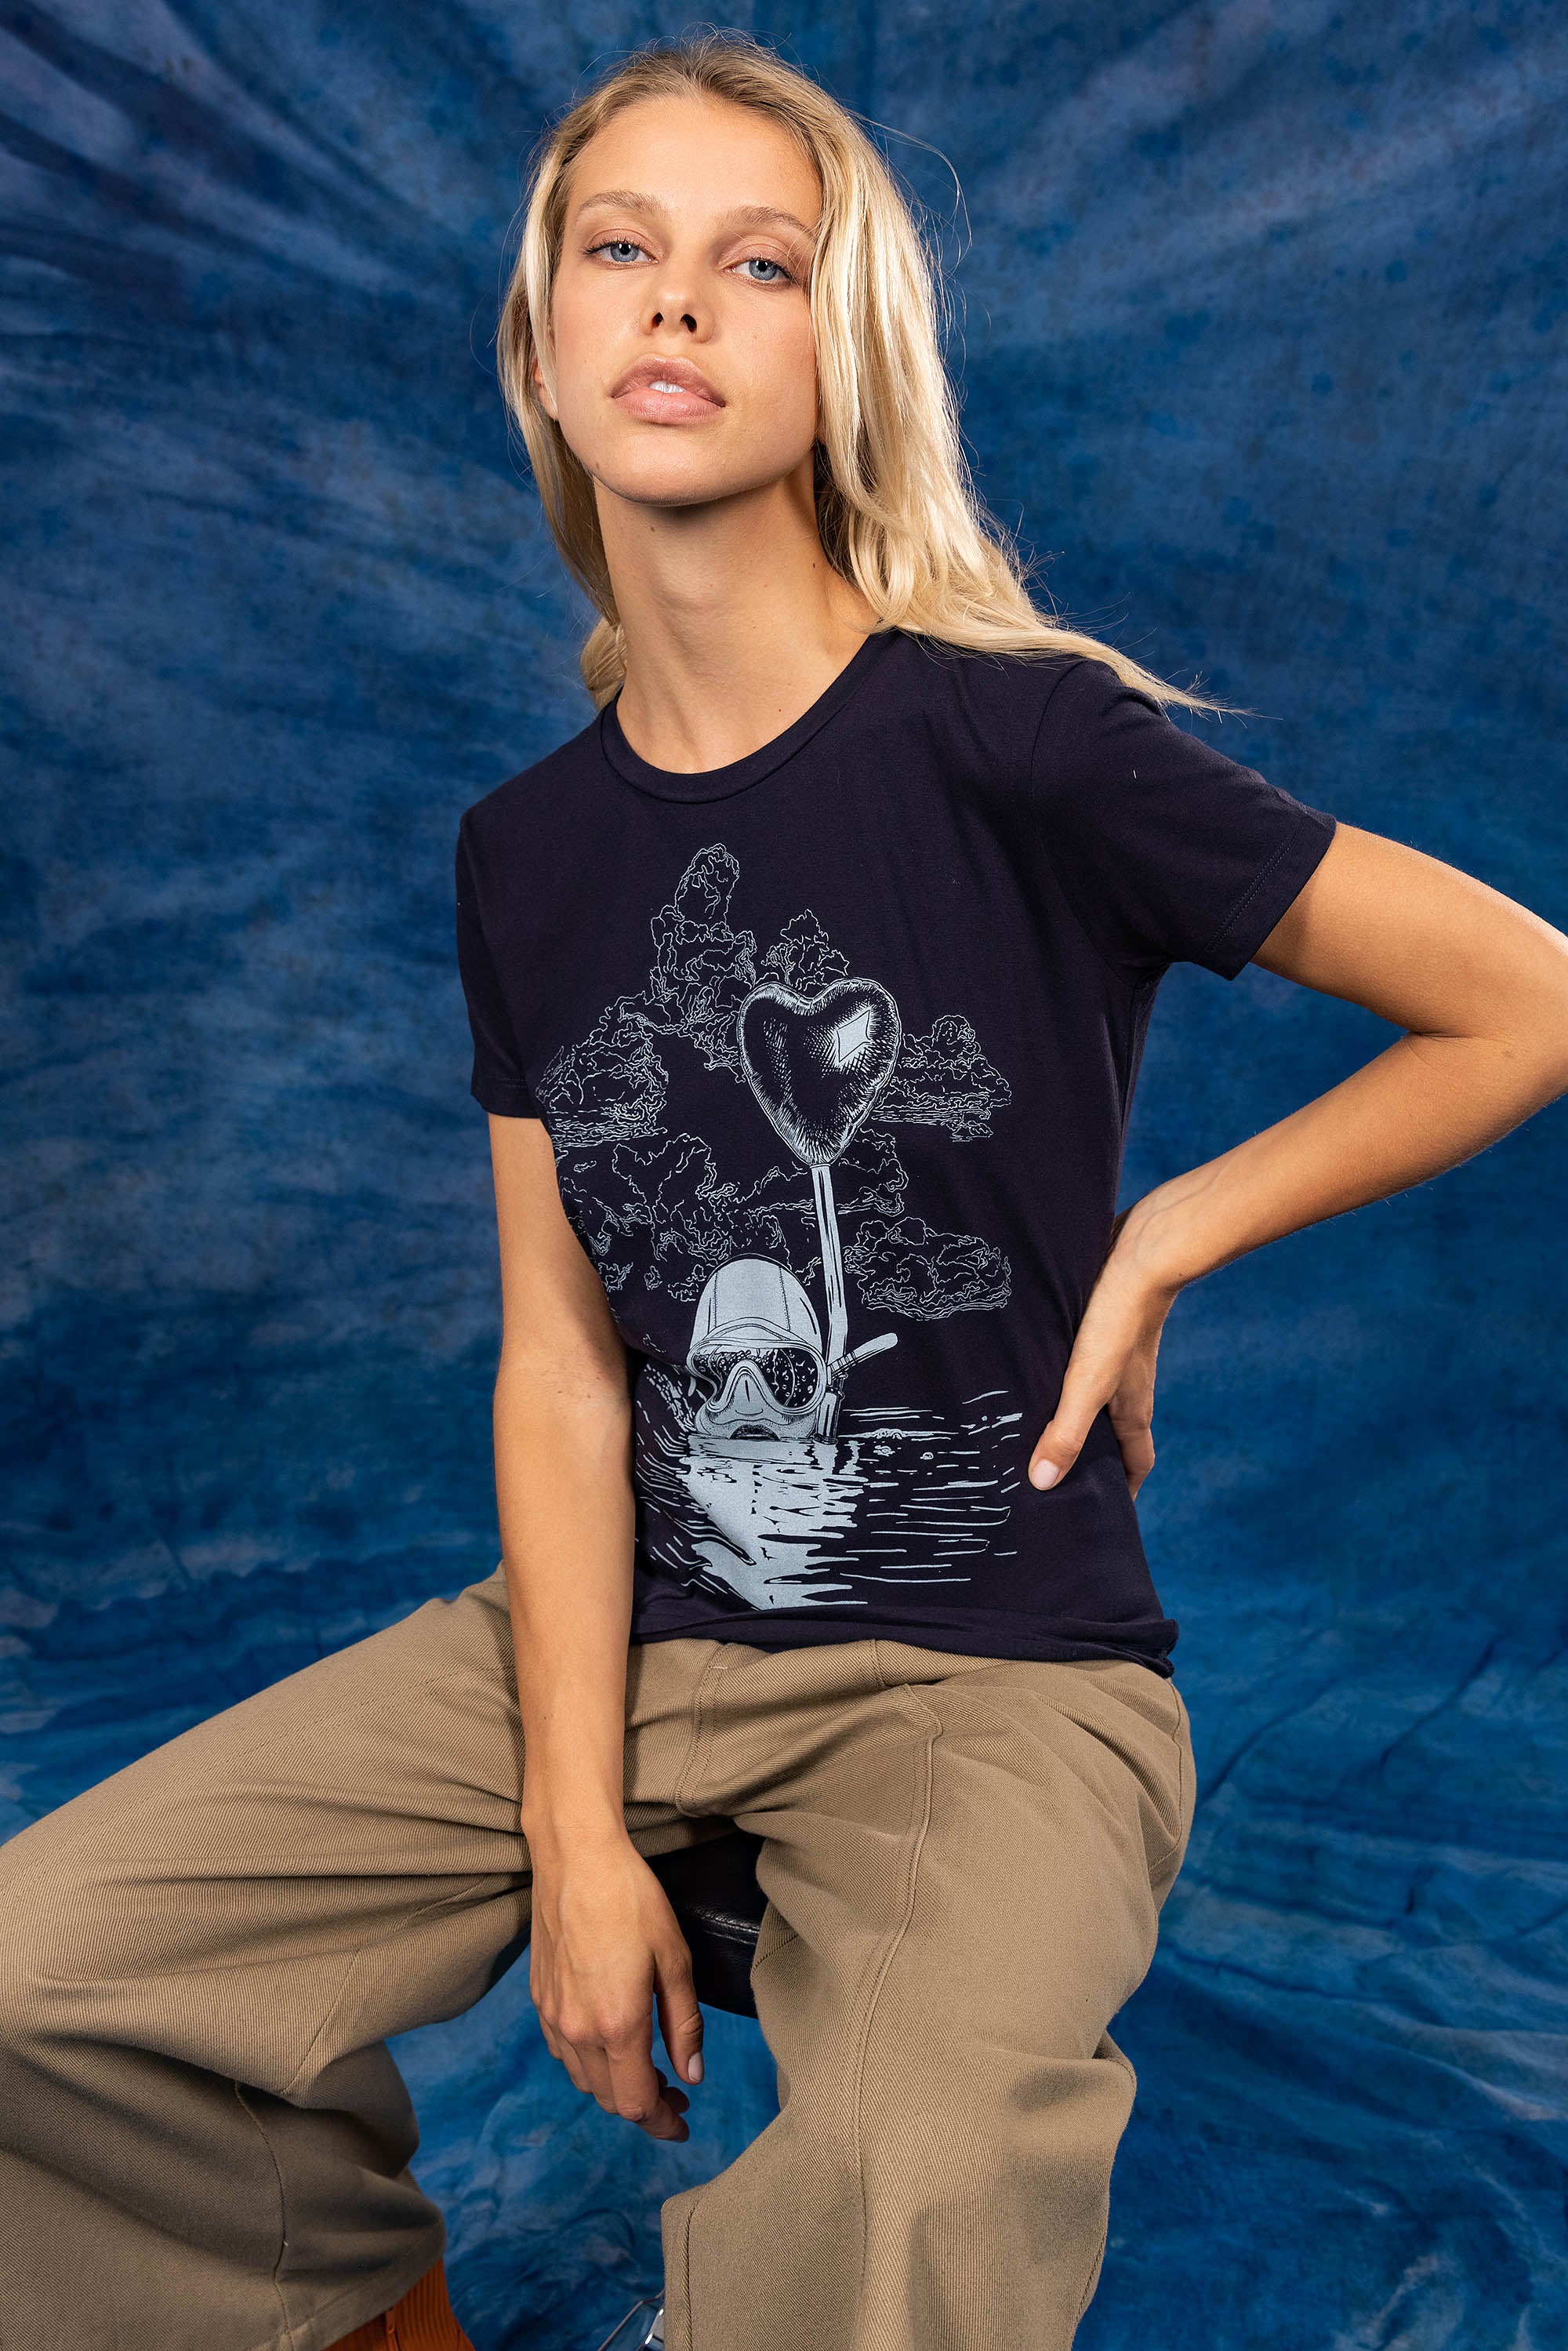 women's navy blue t-shirt with ocean diving illustration screen print novelty new summer 2023 collection misericordia